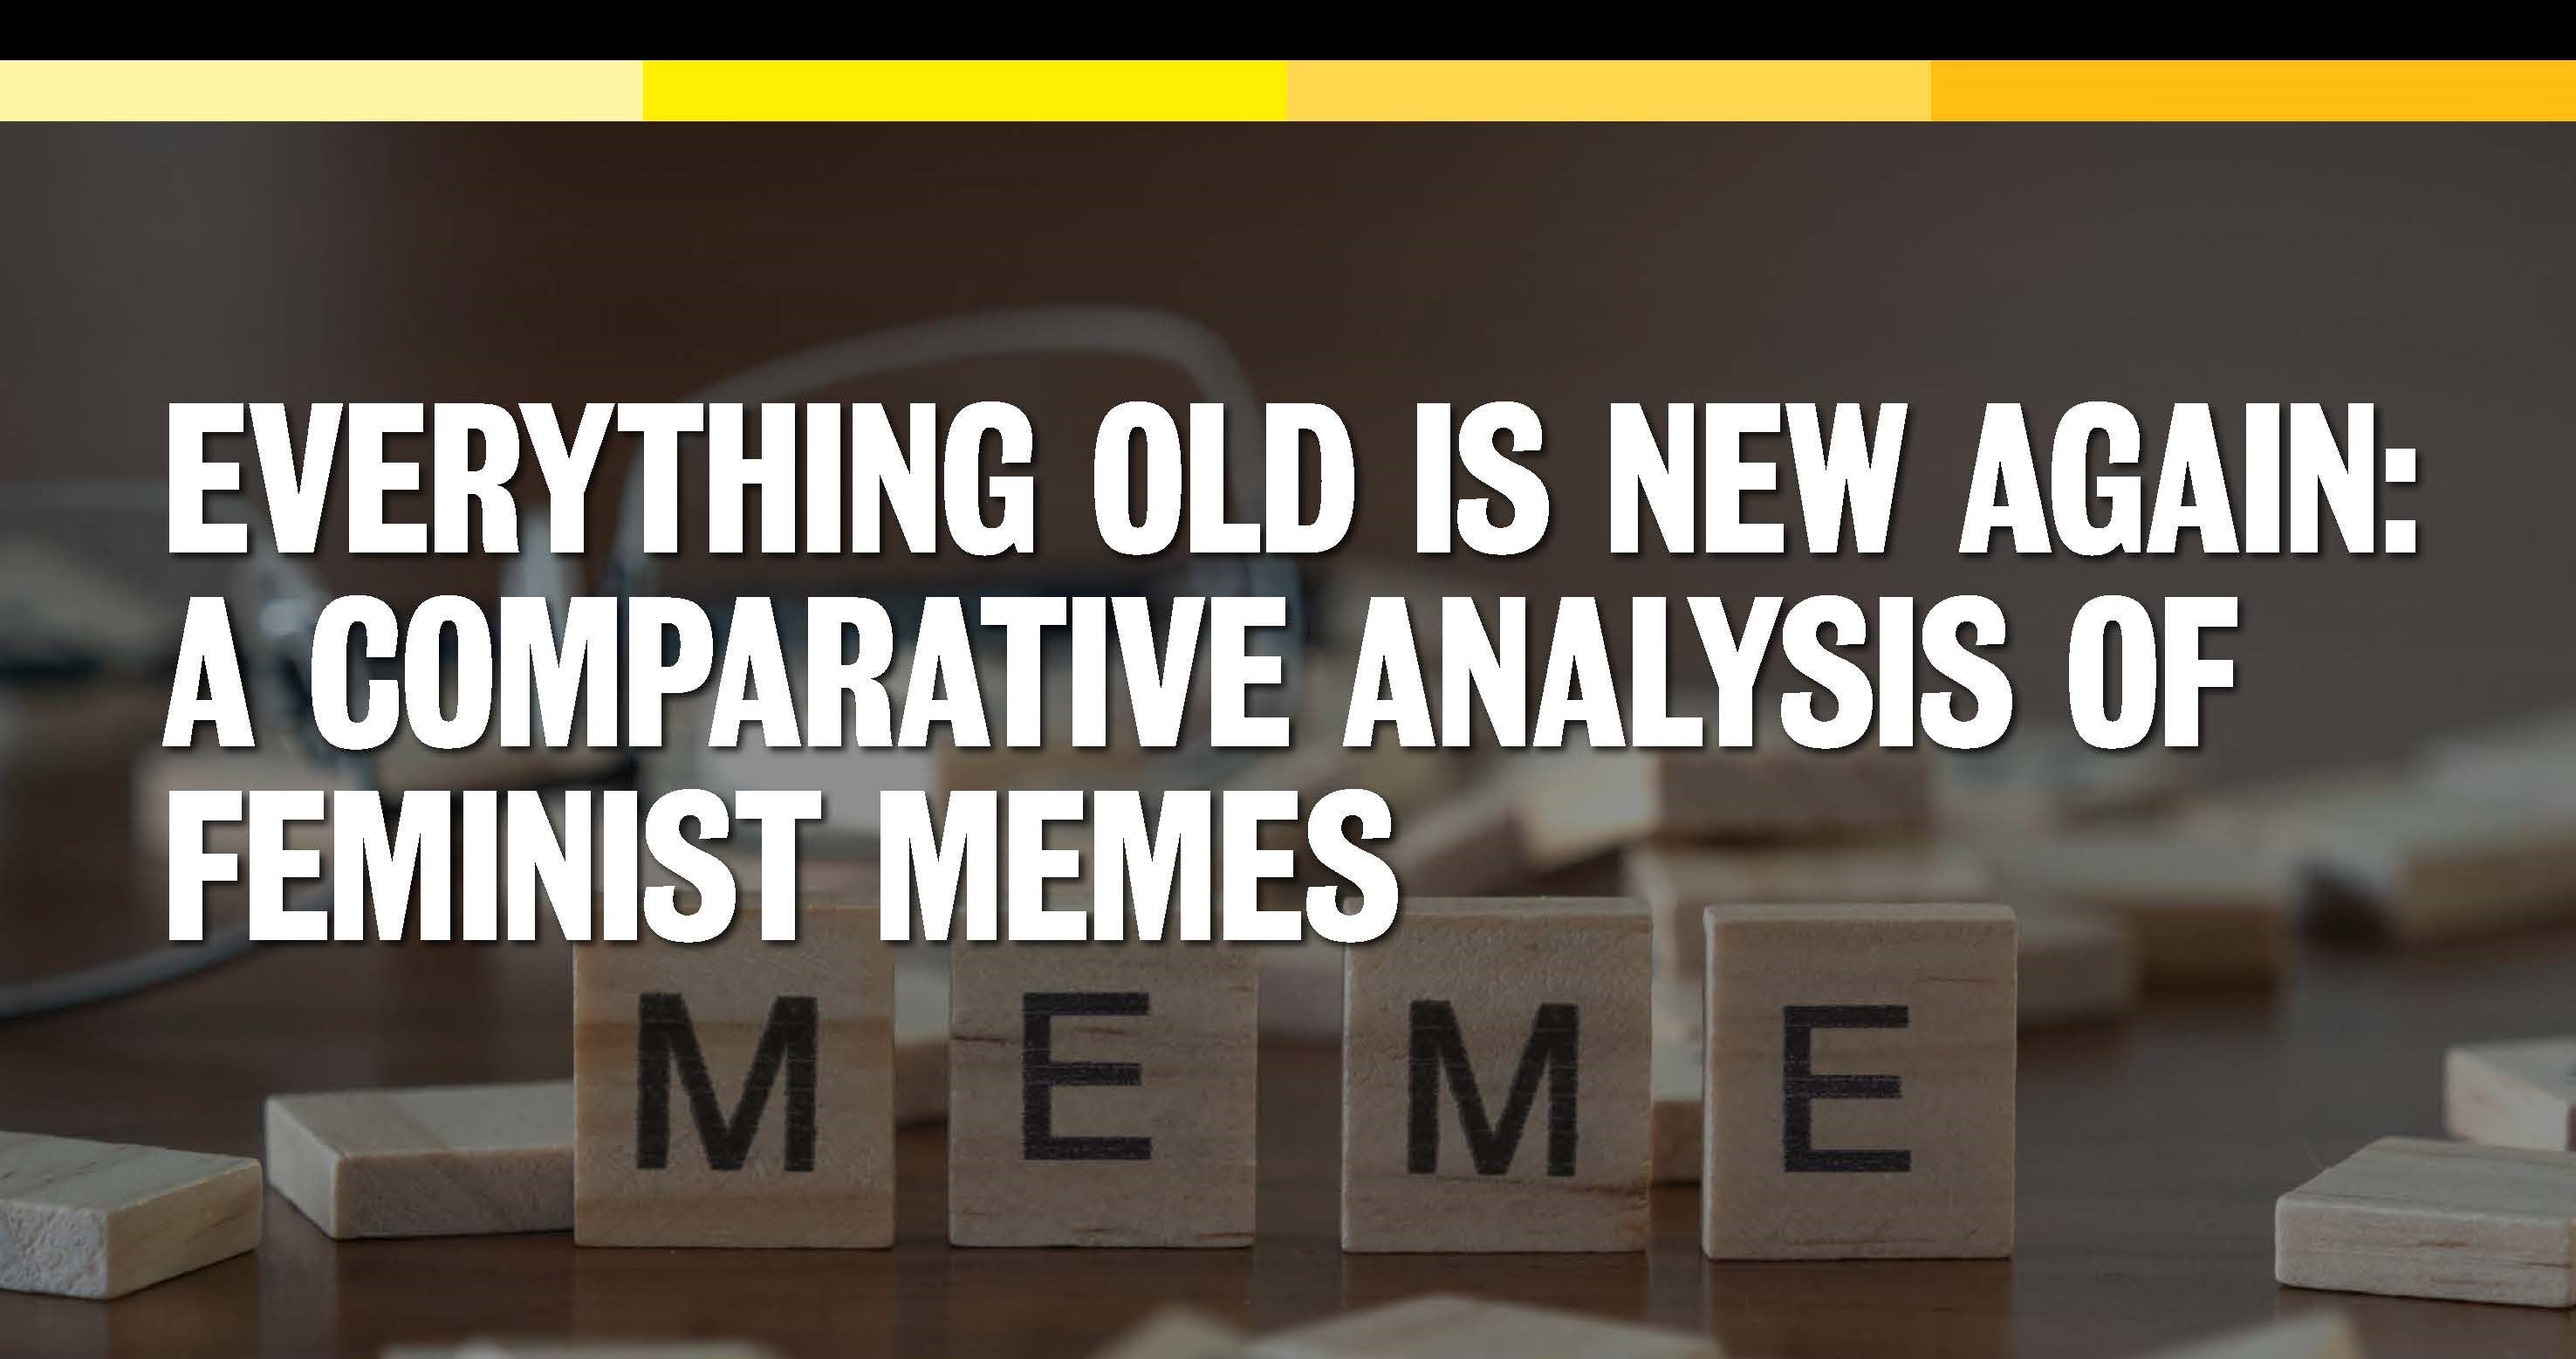 Everything Old is New Again: A Comparative Analysis of Feminist Memes poster title with scrabble pieces spelling "meme"